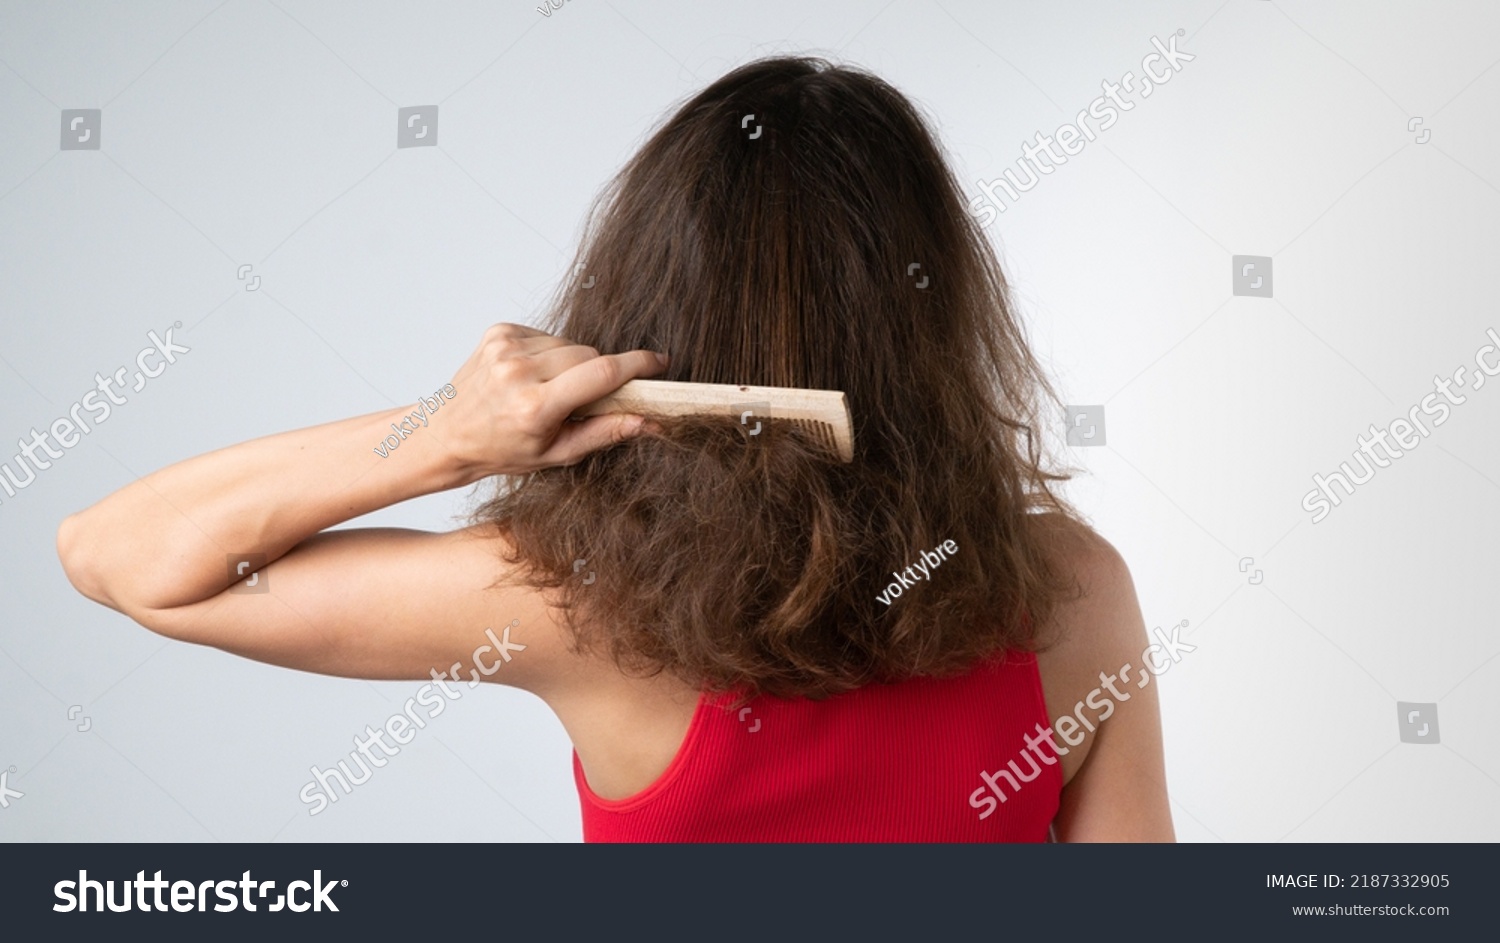 A woman tries to comb her tangled hair from behind with a comb - hair problems. High quality photo #2187332905